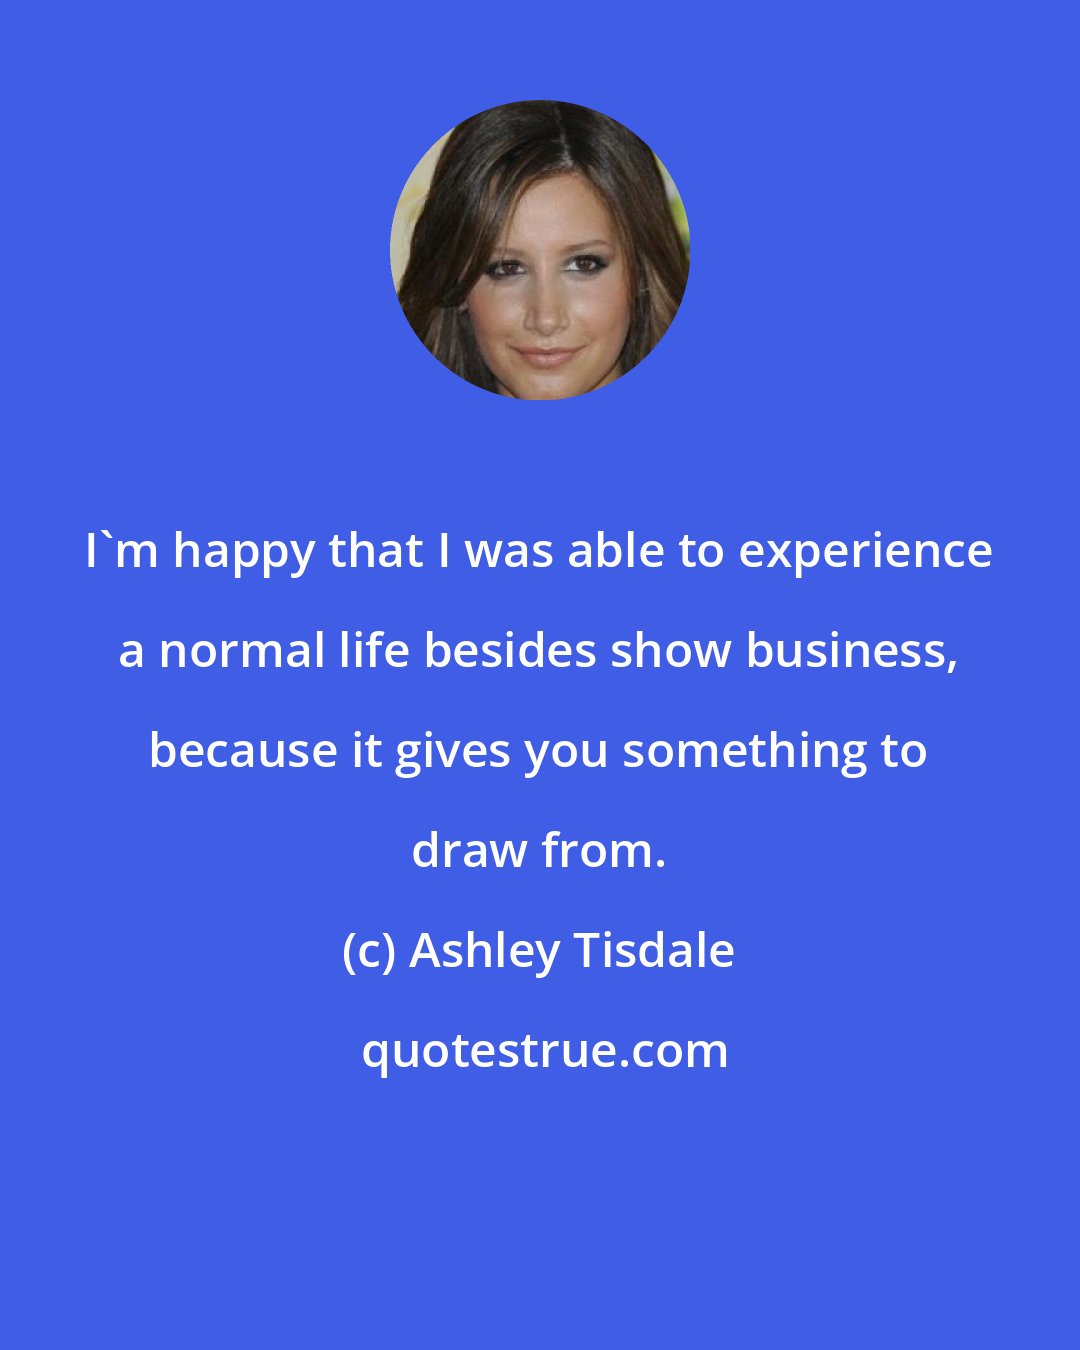 Ashley Tisdale: I'm happy that I was able to experience a normal life besides show business, because it gives you something to draw from.